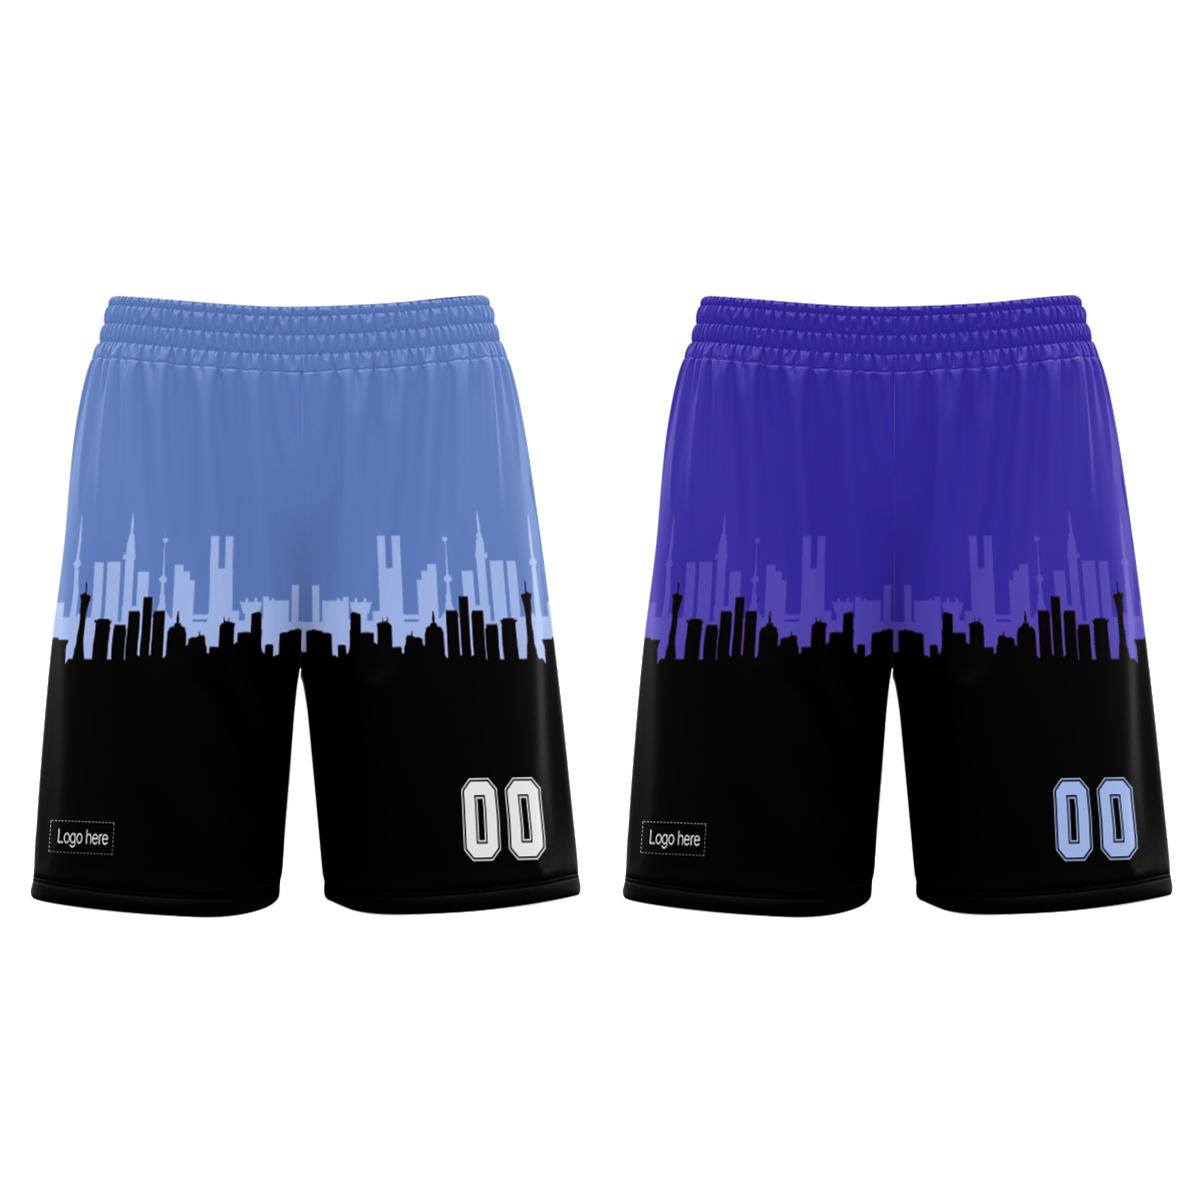 new-design-sublimation-basketball-jersey-uniform-for-teenager-and-adult-with-custom-logo-at-cj-pod-7